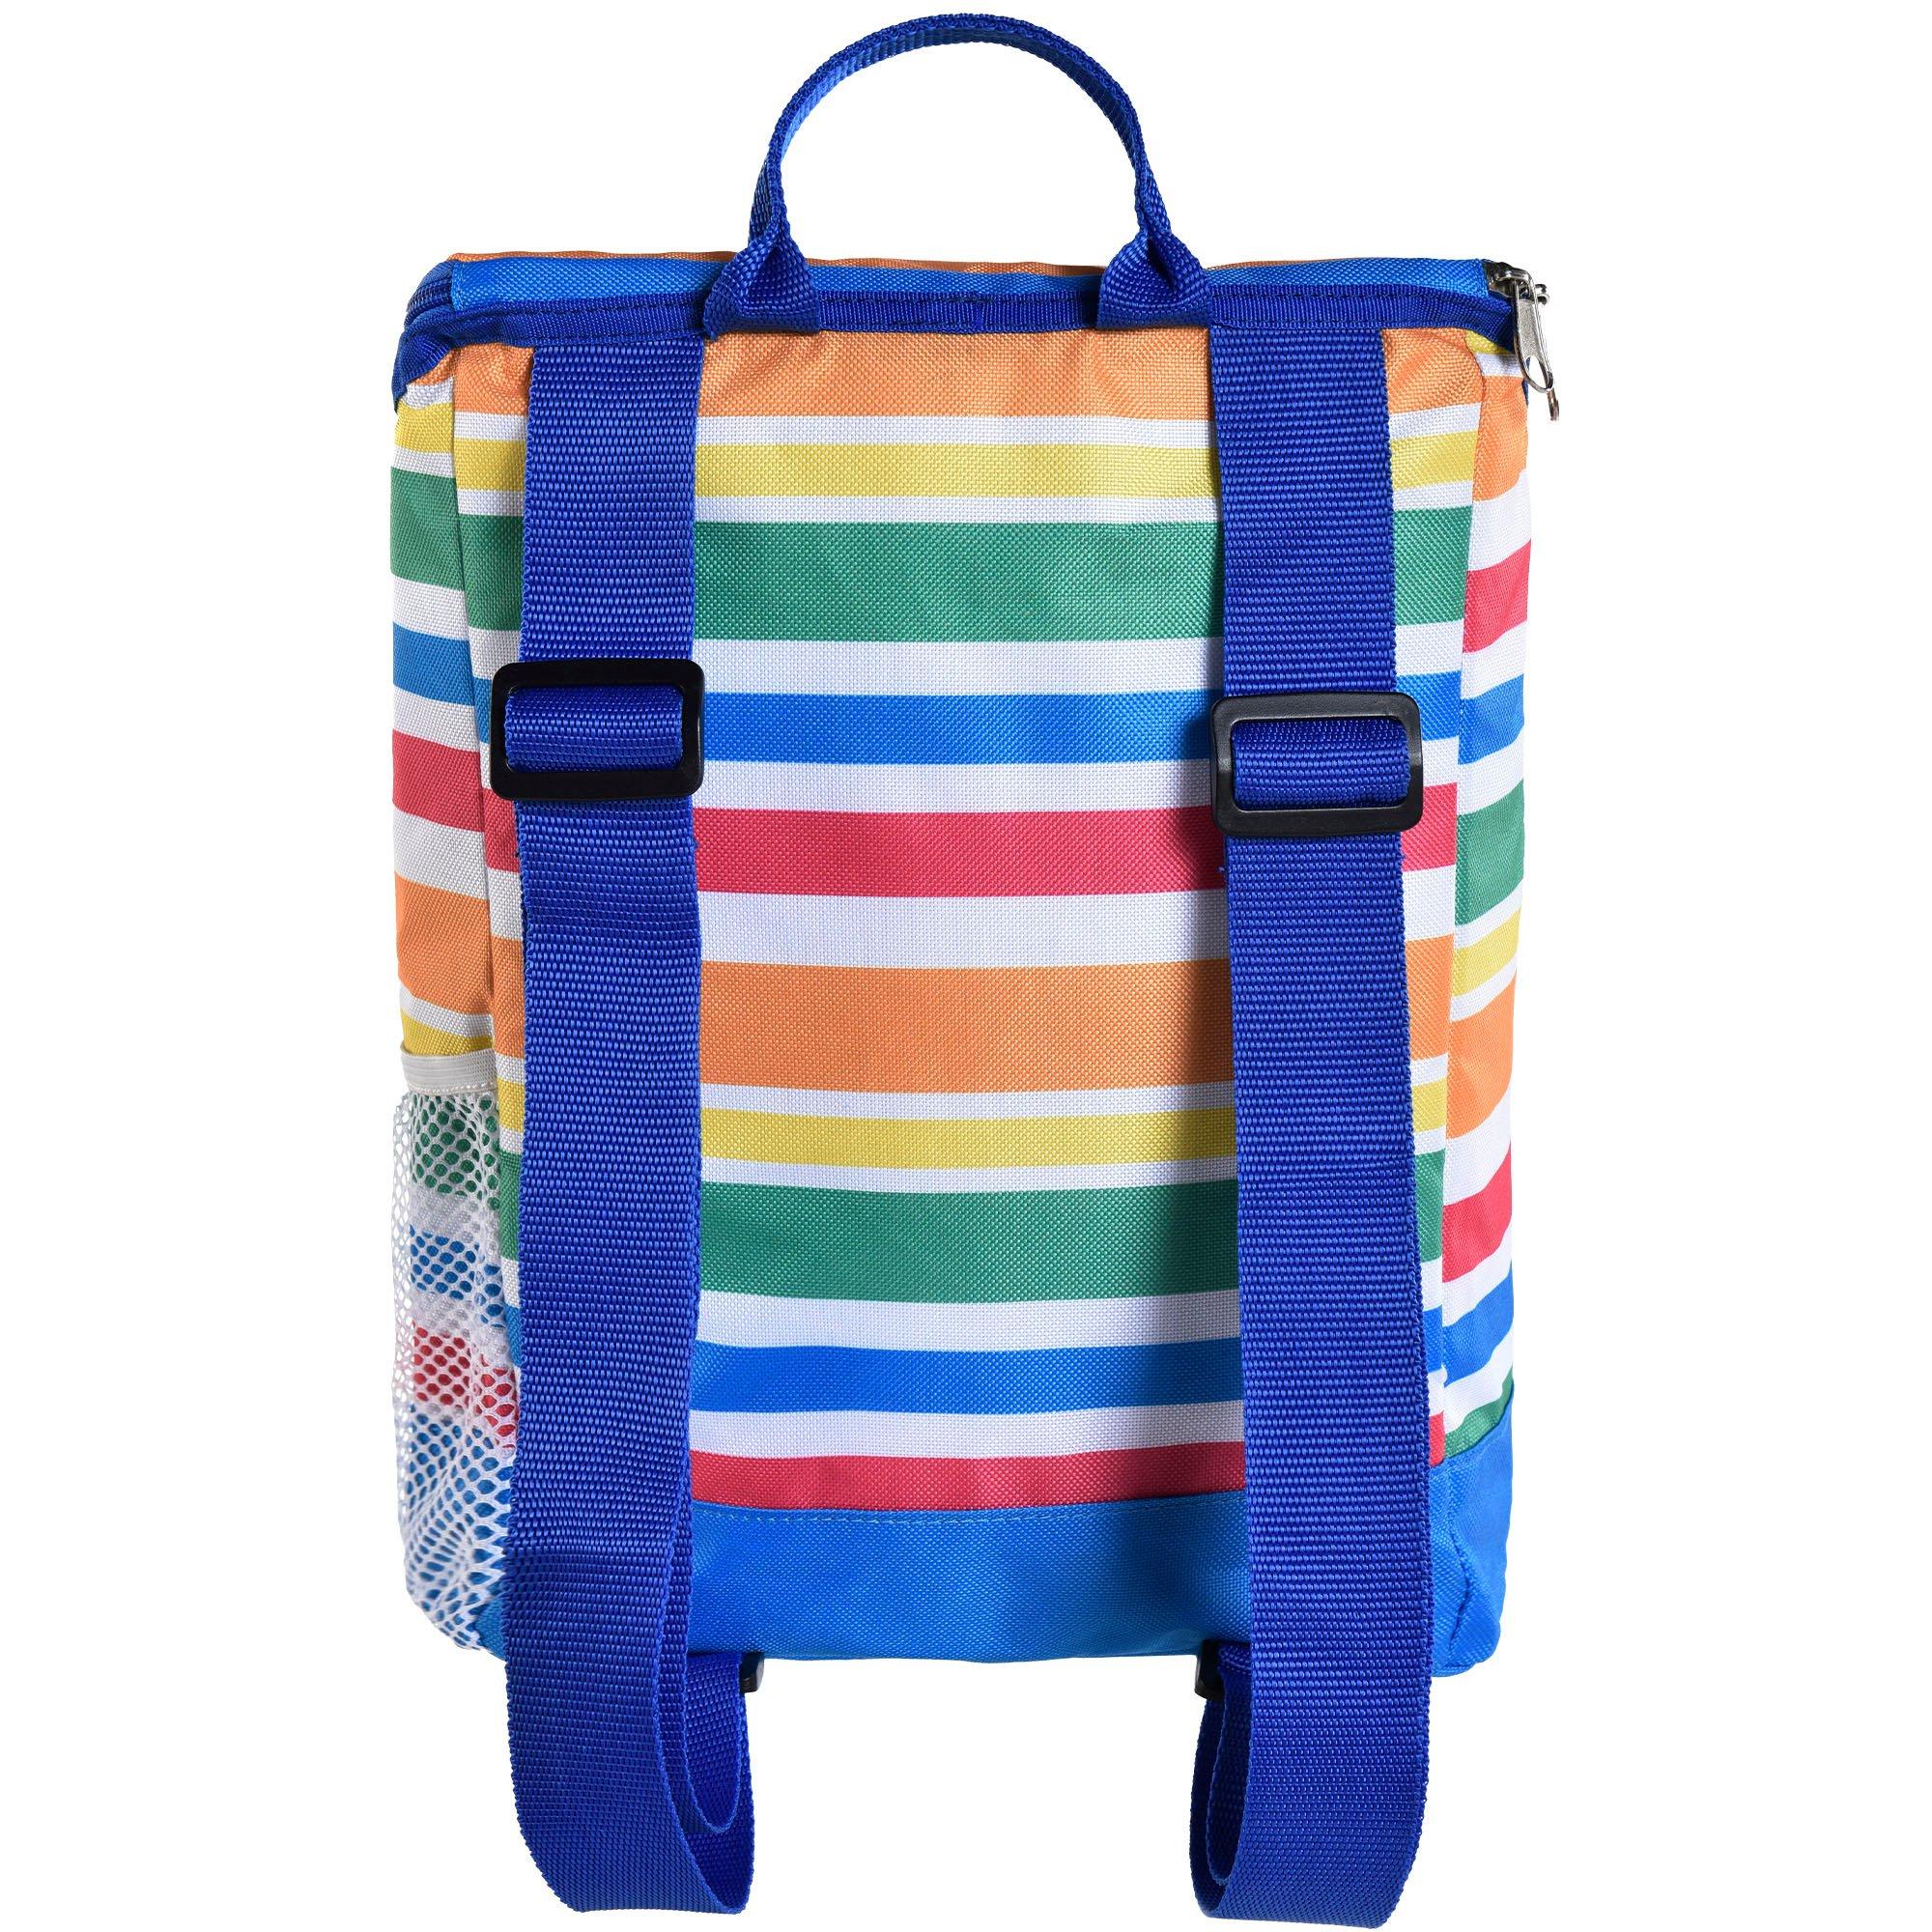 United States 【PACKiT】Ice-Cool Accompanying Cooler Bag (Rainbow